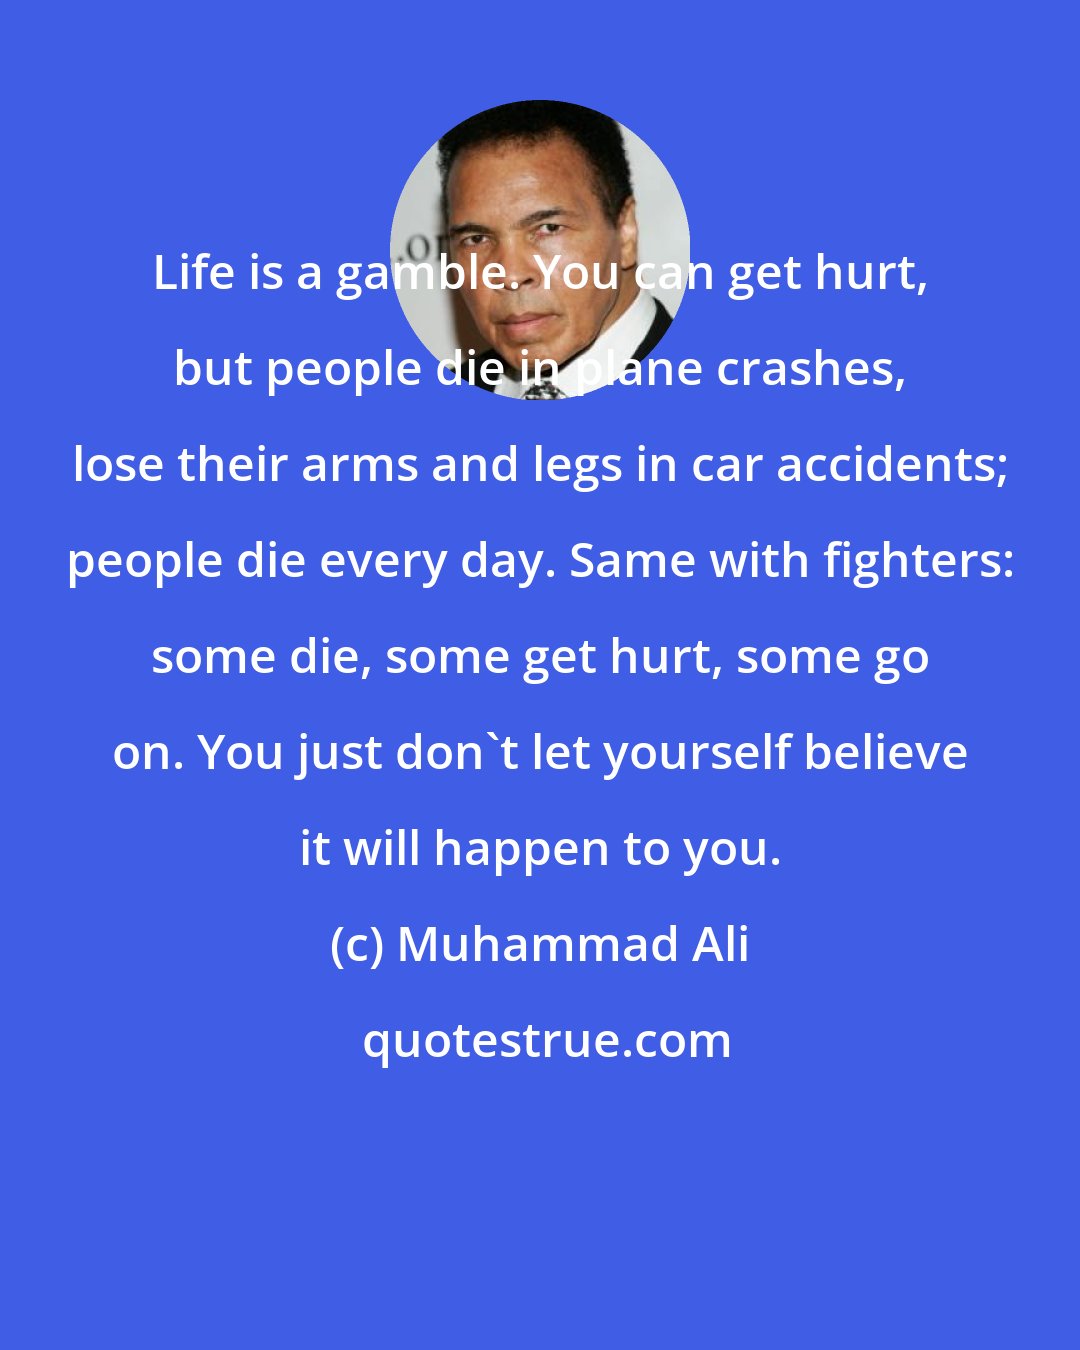 Muhammad Ali: Life is a gamble. You can get hurt, but people die in plane crashes, lose their arms and legs in car accidents; people die every day. Same with fighters: some die, some get hurt, some go on. You just don't let yourself believe it will happen to you.